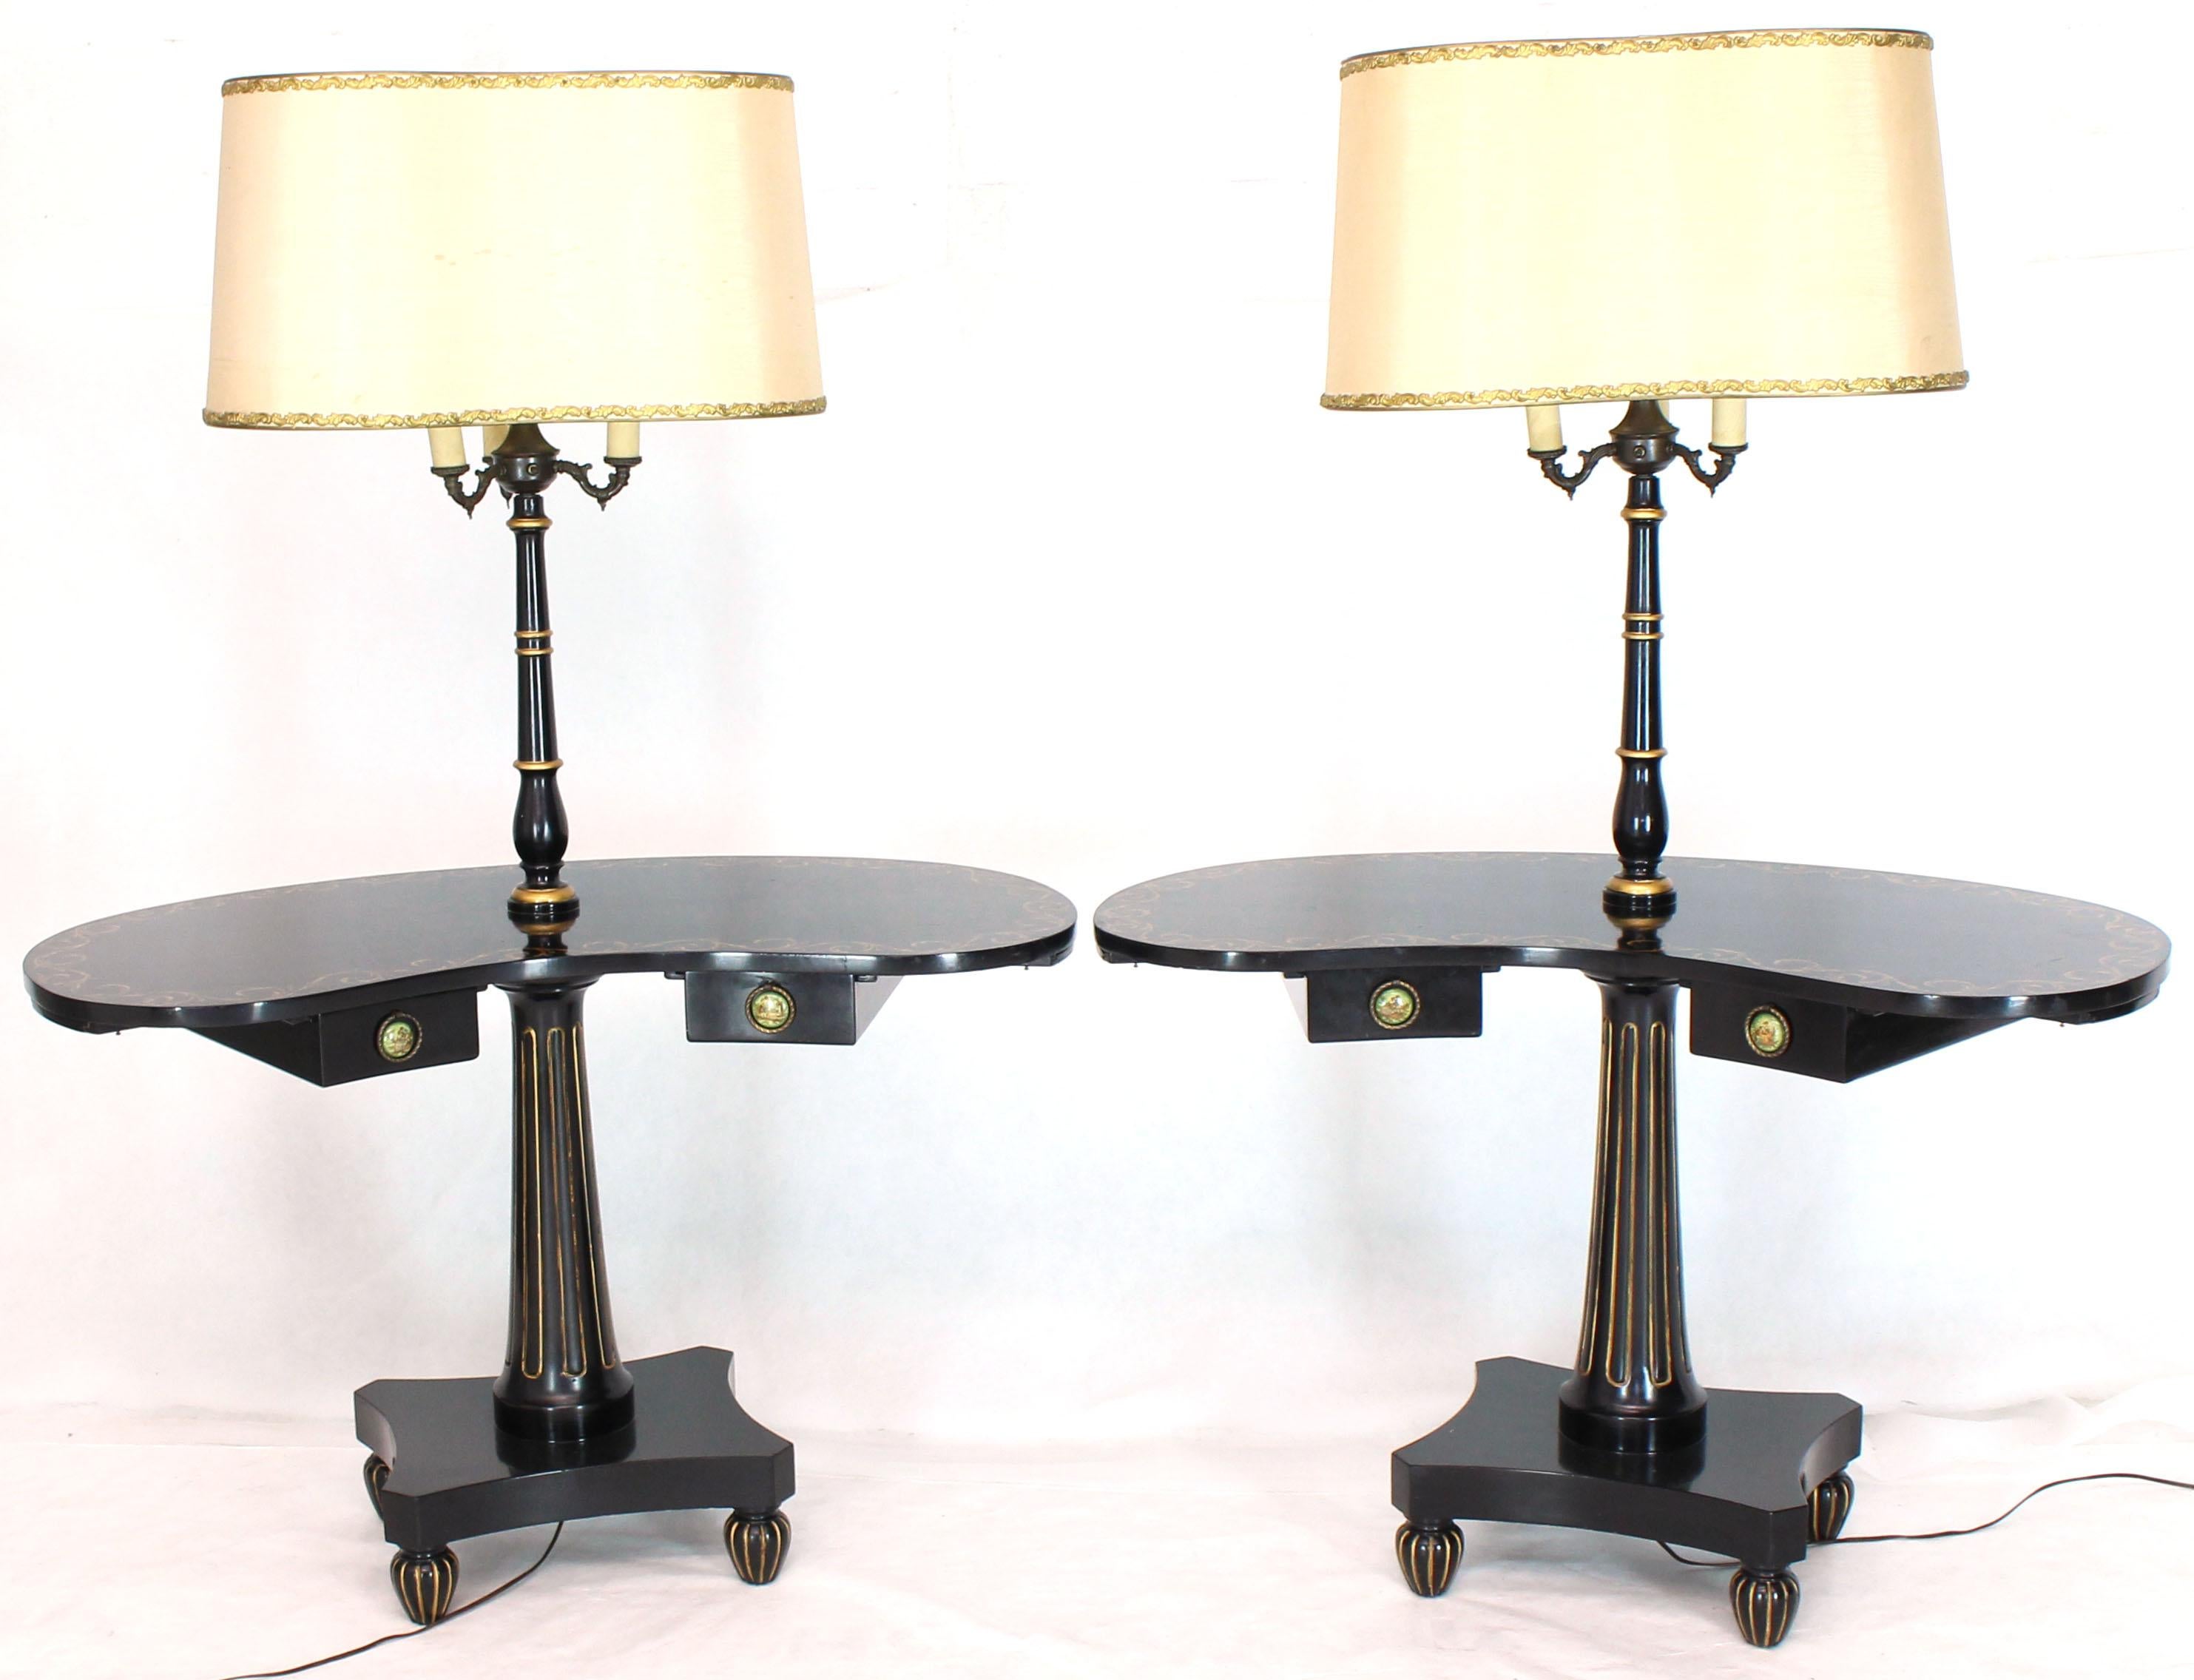 Pair of Black Lacquer Gold Decorated Kidney Shape Deco Floor Lamps Side Tables For Sale 2